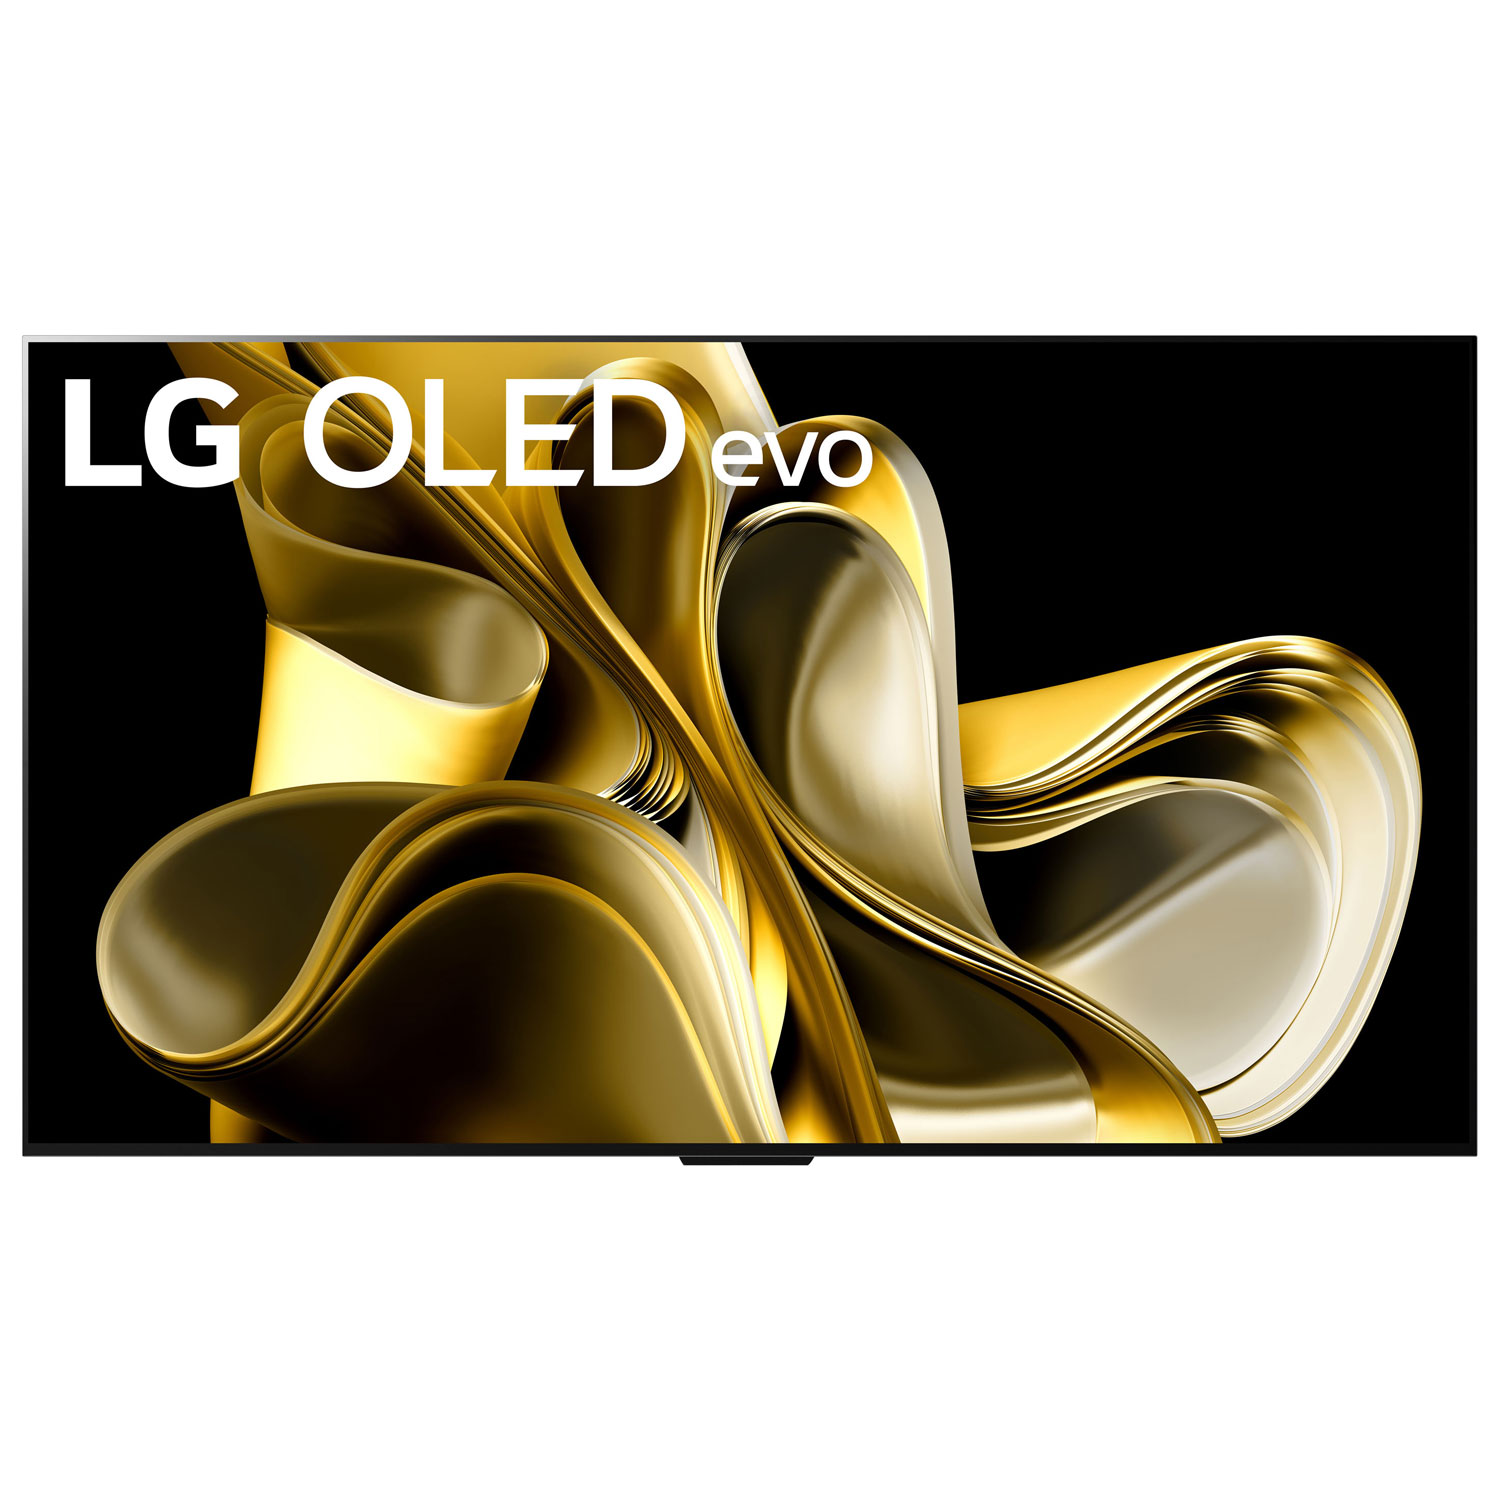 LG evo M3 77" 4K UHD HDR OLED webOS23 Smart TV (OLED77M3PUA) - 2023 - Satin Silver - Only at Best Buy